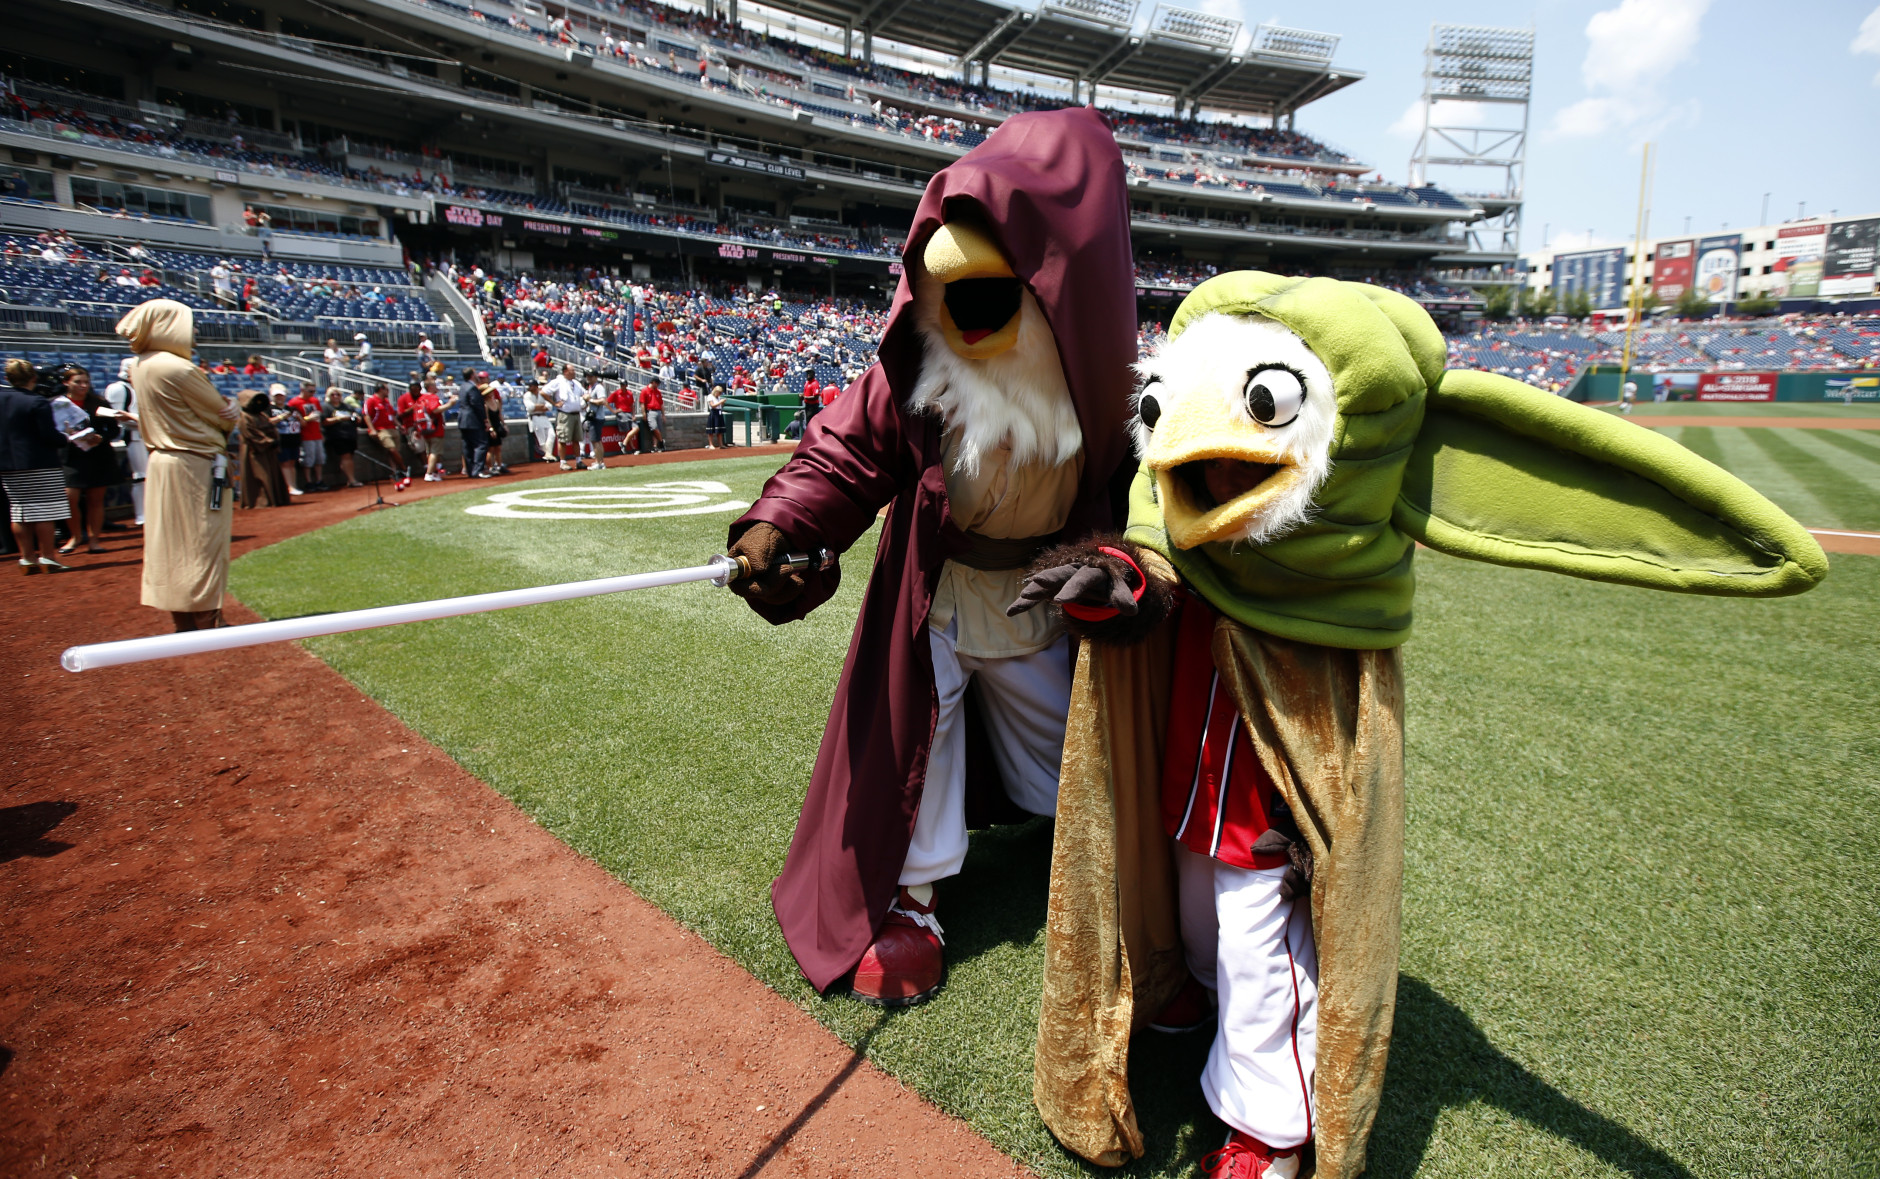 Washington Nationals mascots Screech and Little Screech wear Star Wards costumes as Luke Skywalker and Yoda, on Star Wars day before a baseball game against the Los Angeles Dodgers at Nationals Park, Sunday, July 19, 2015, in Washington. (AP Photo/Alex Brandon)